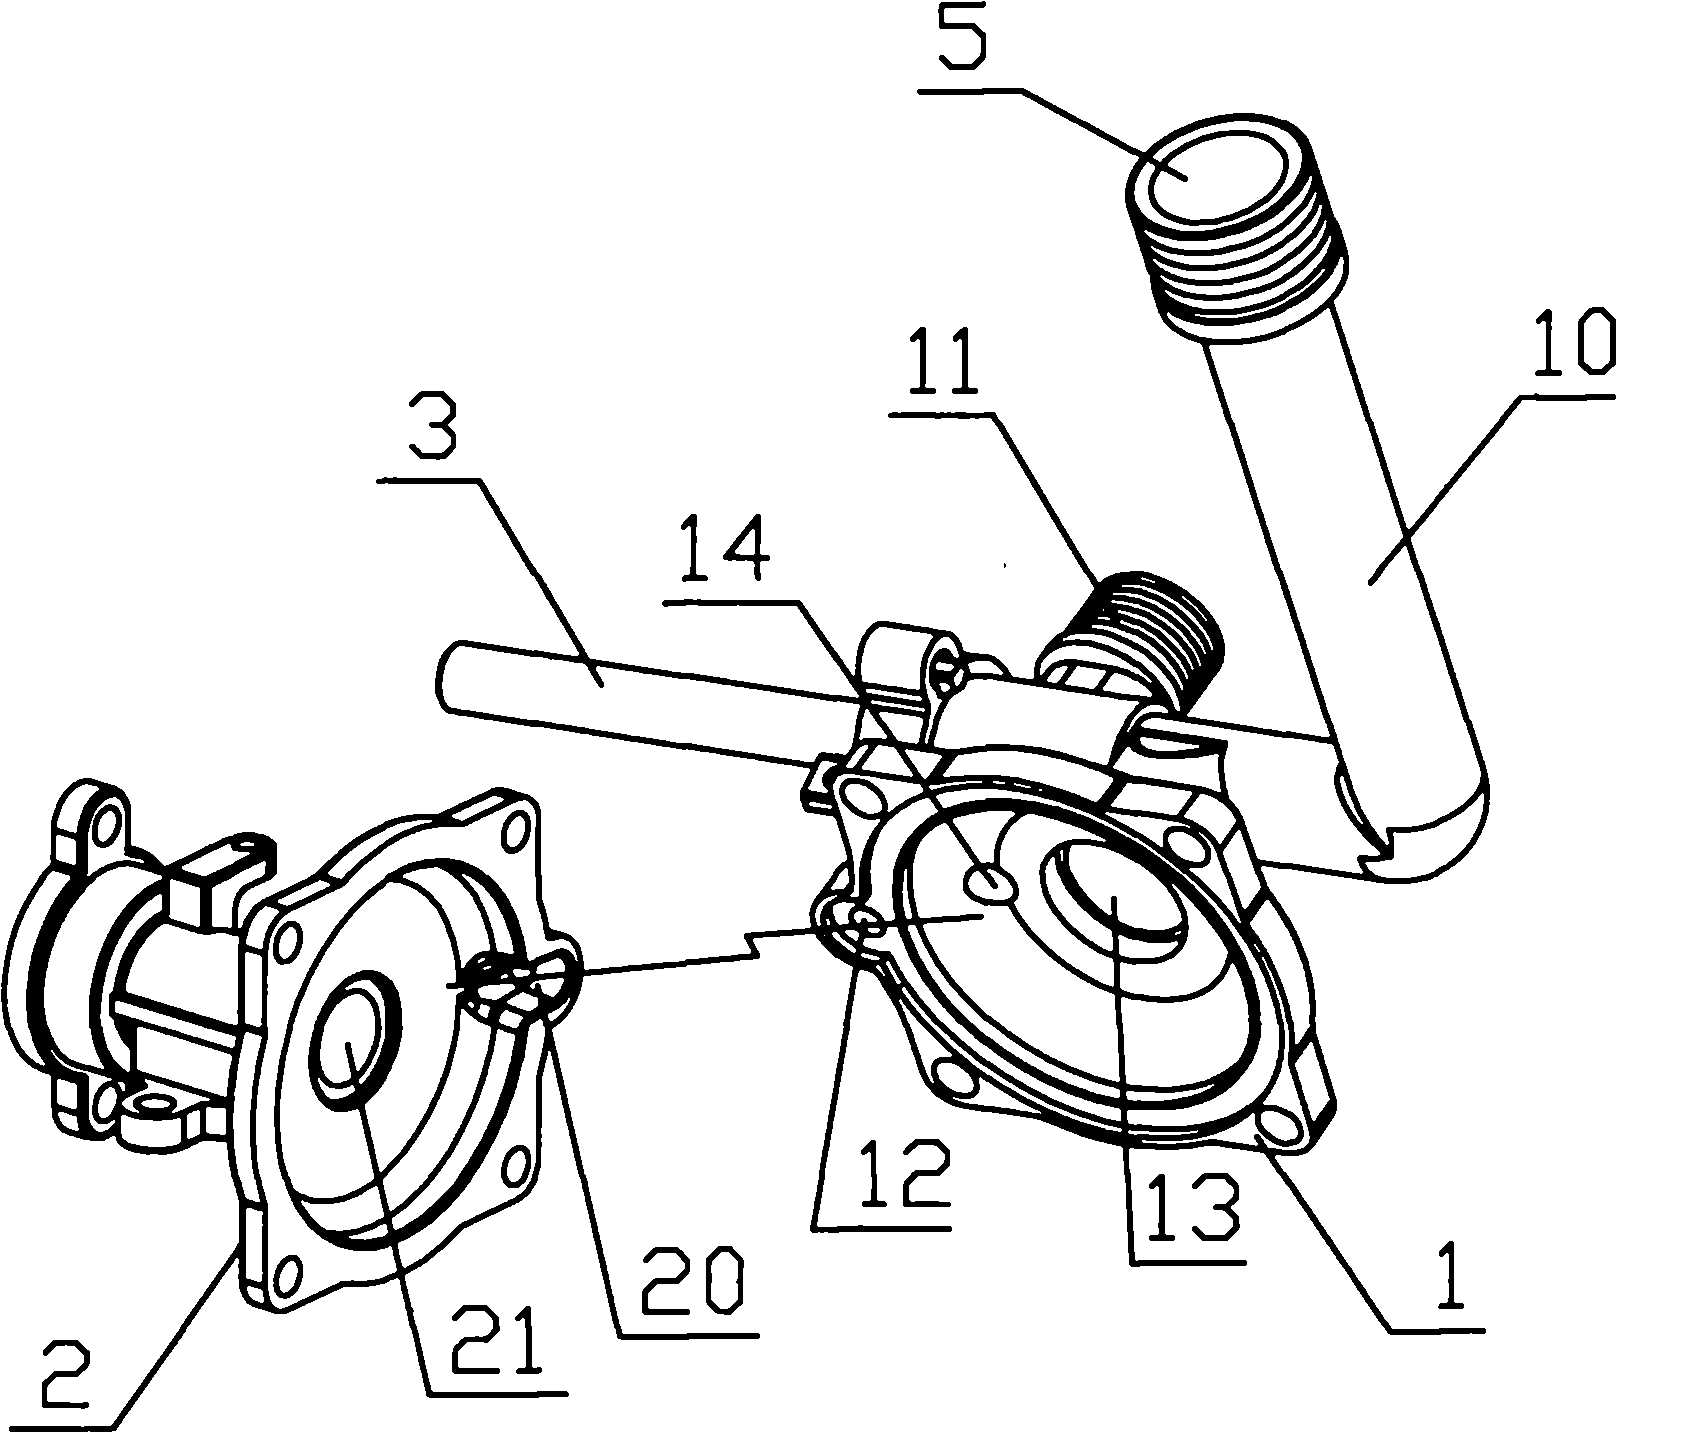 Water and gas coupled valve of gas water heater